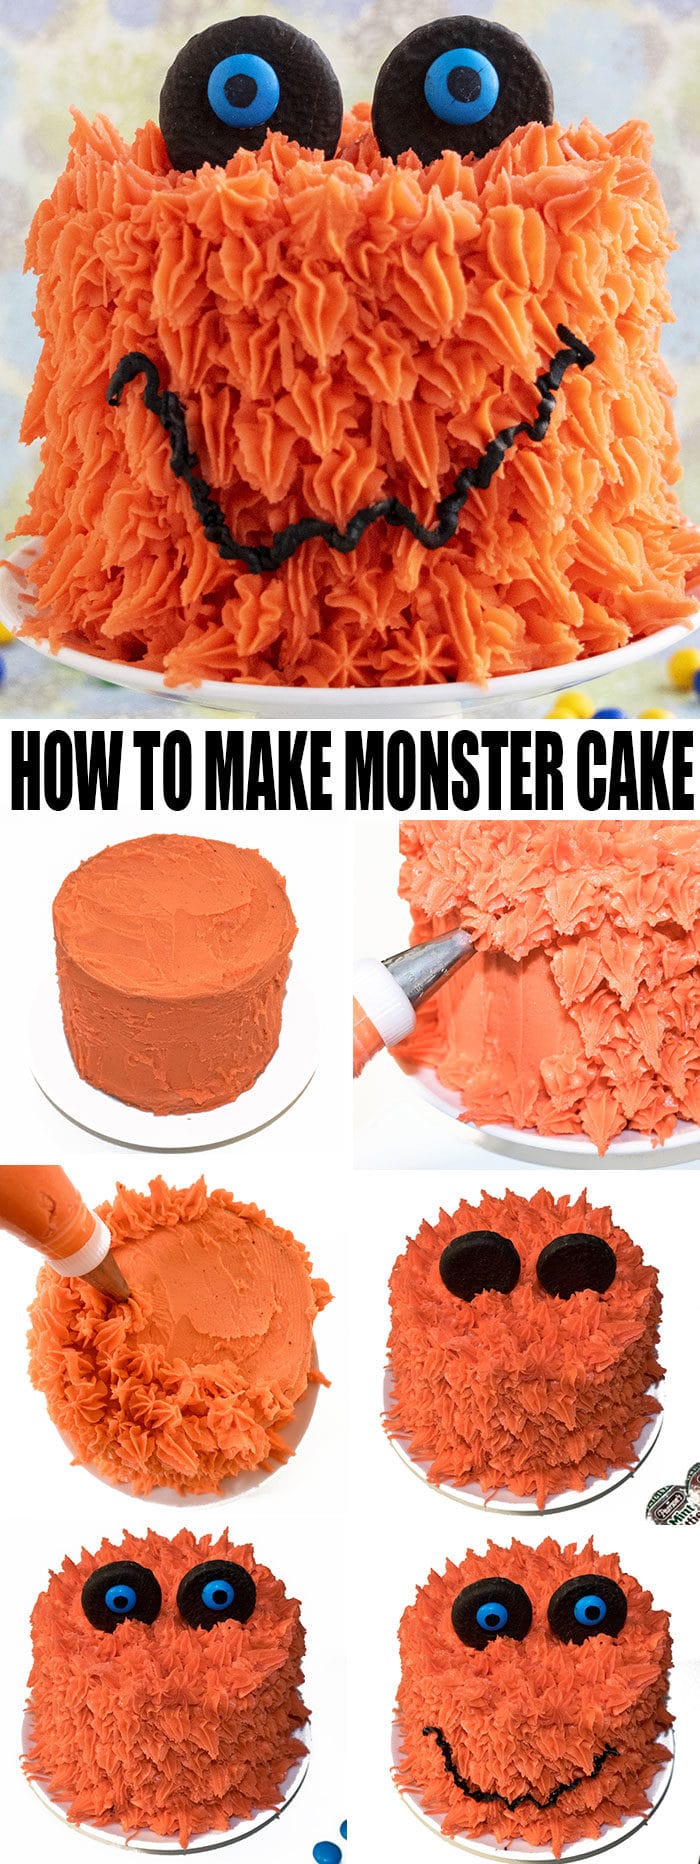 How to Make Monster Cake- Step by Step Instructions